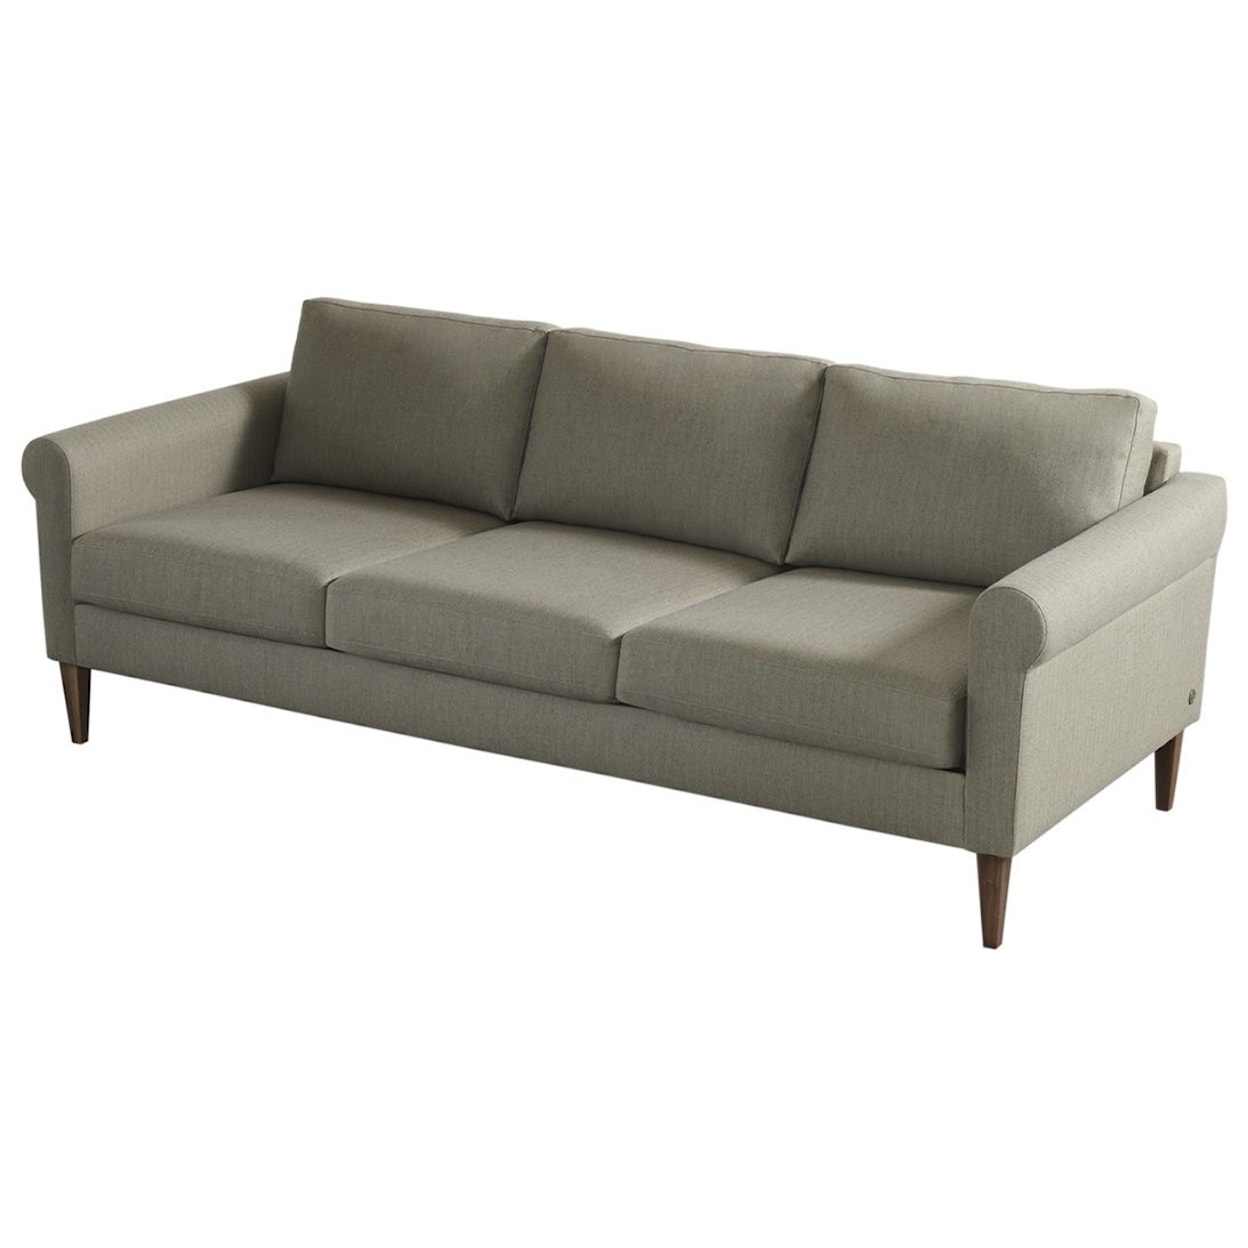 American Leather Rolled Arm - Personalize Rolled Arm Sofa